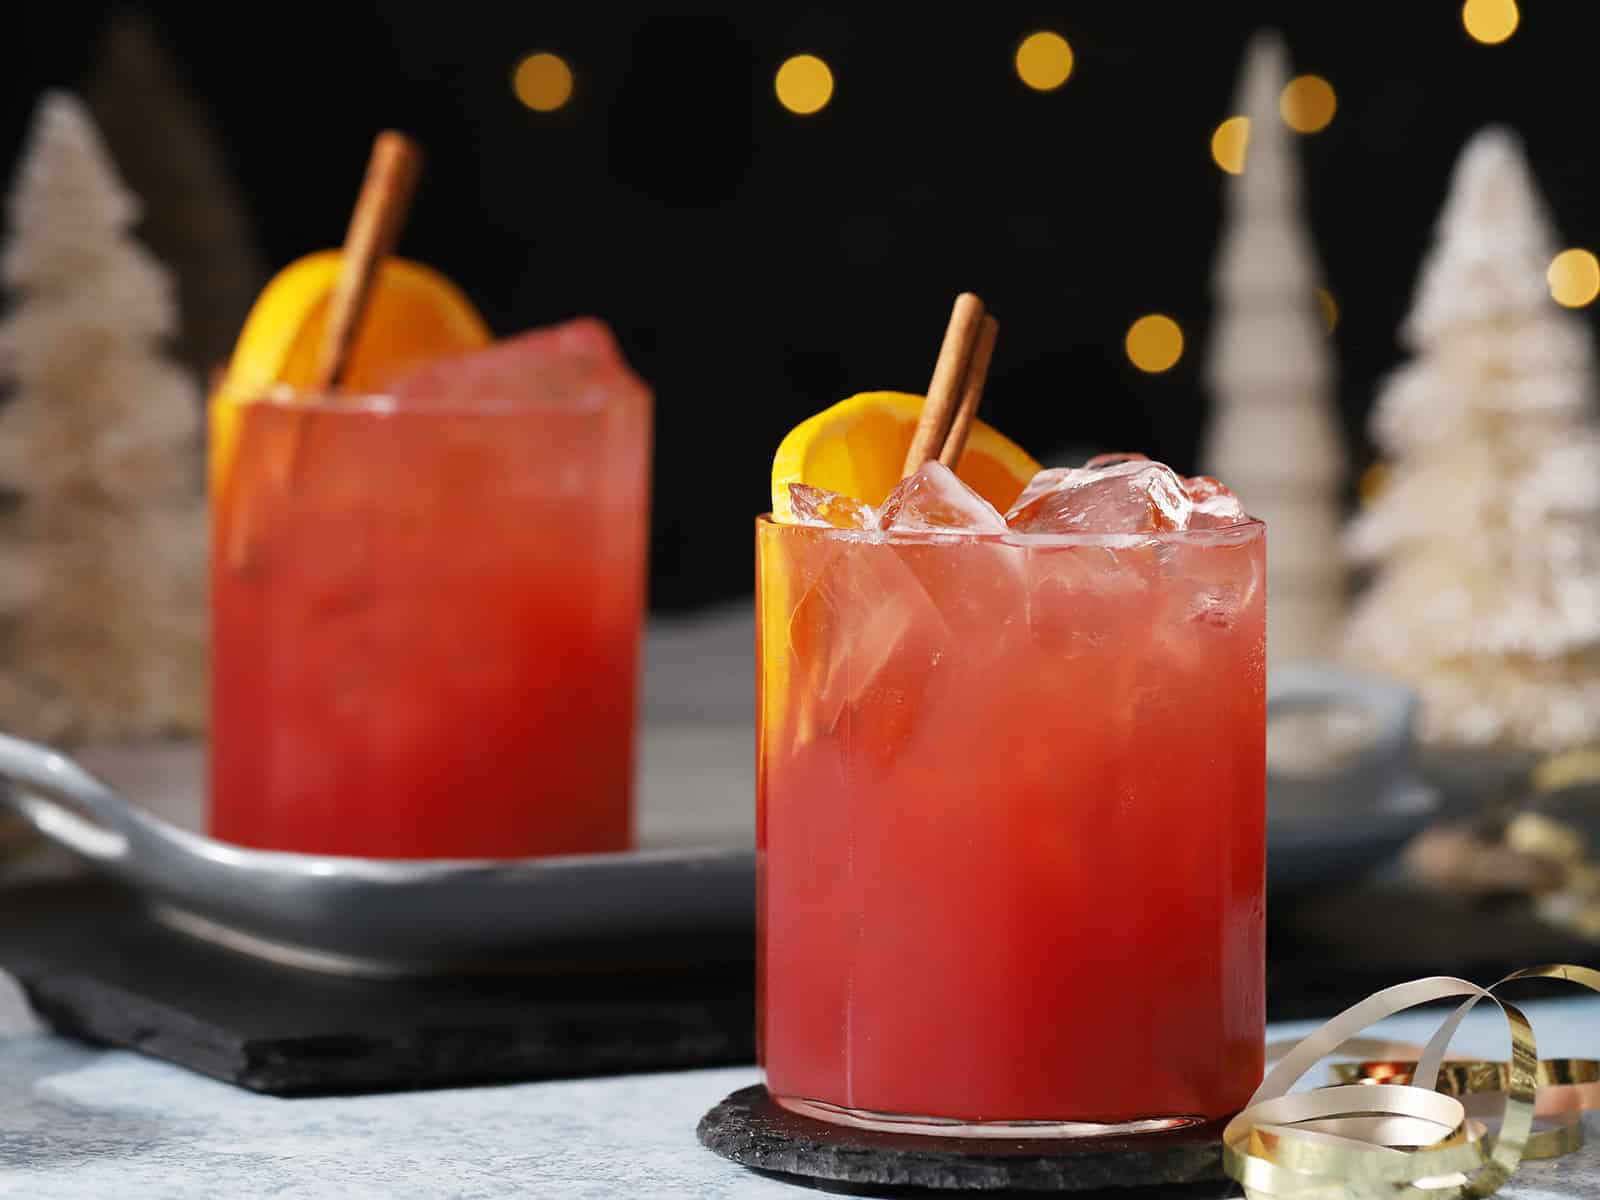 Glasses of cherry holiday mocktail garnished with orange slices and cinnamon sticks.